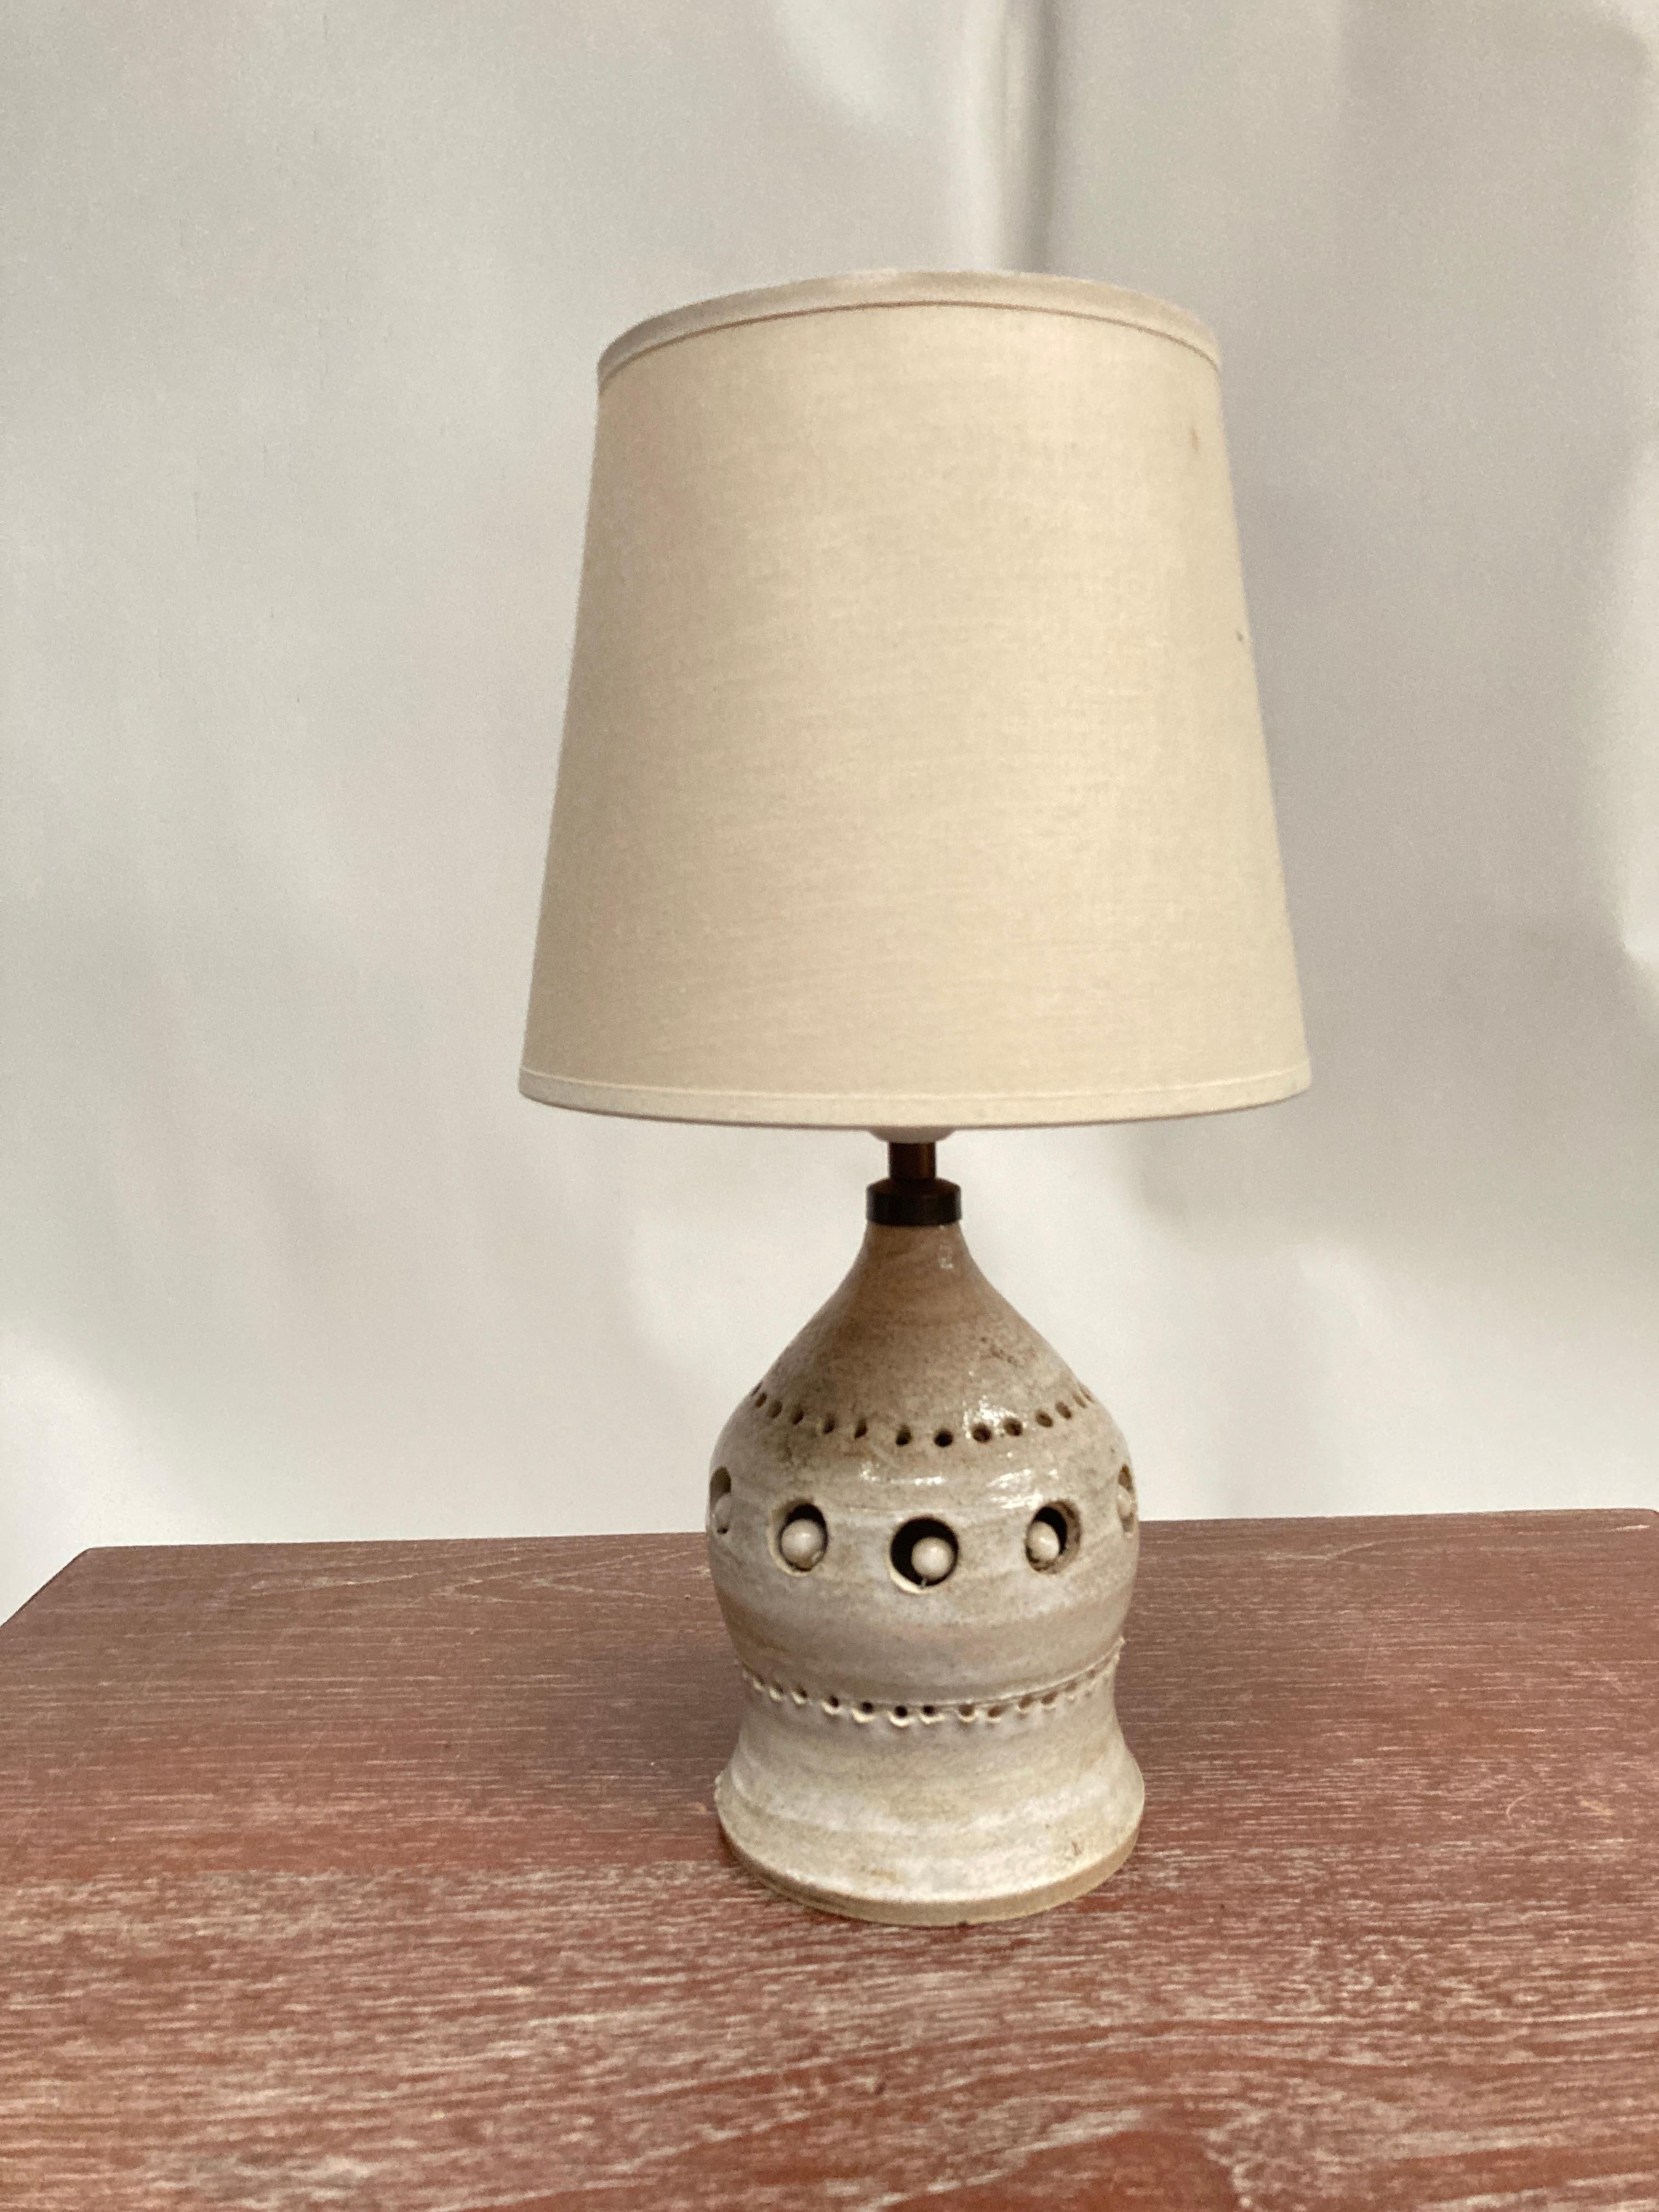 Pretty ceramic lamp by French artist Georges Pelletier
Dimensions given without shade
No shade included